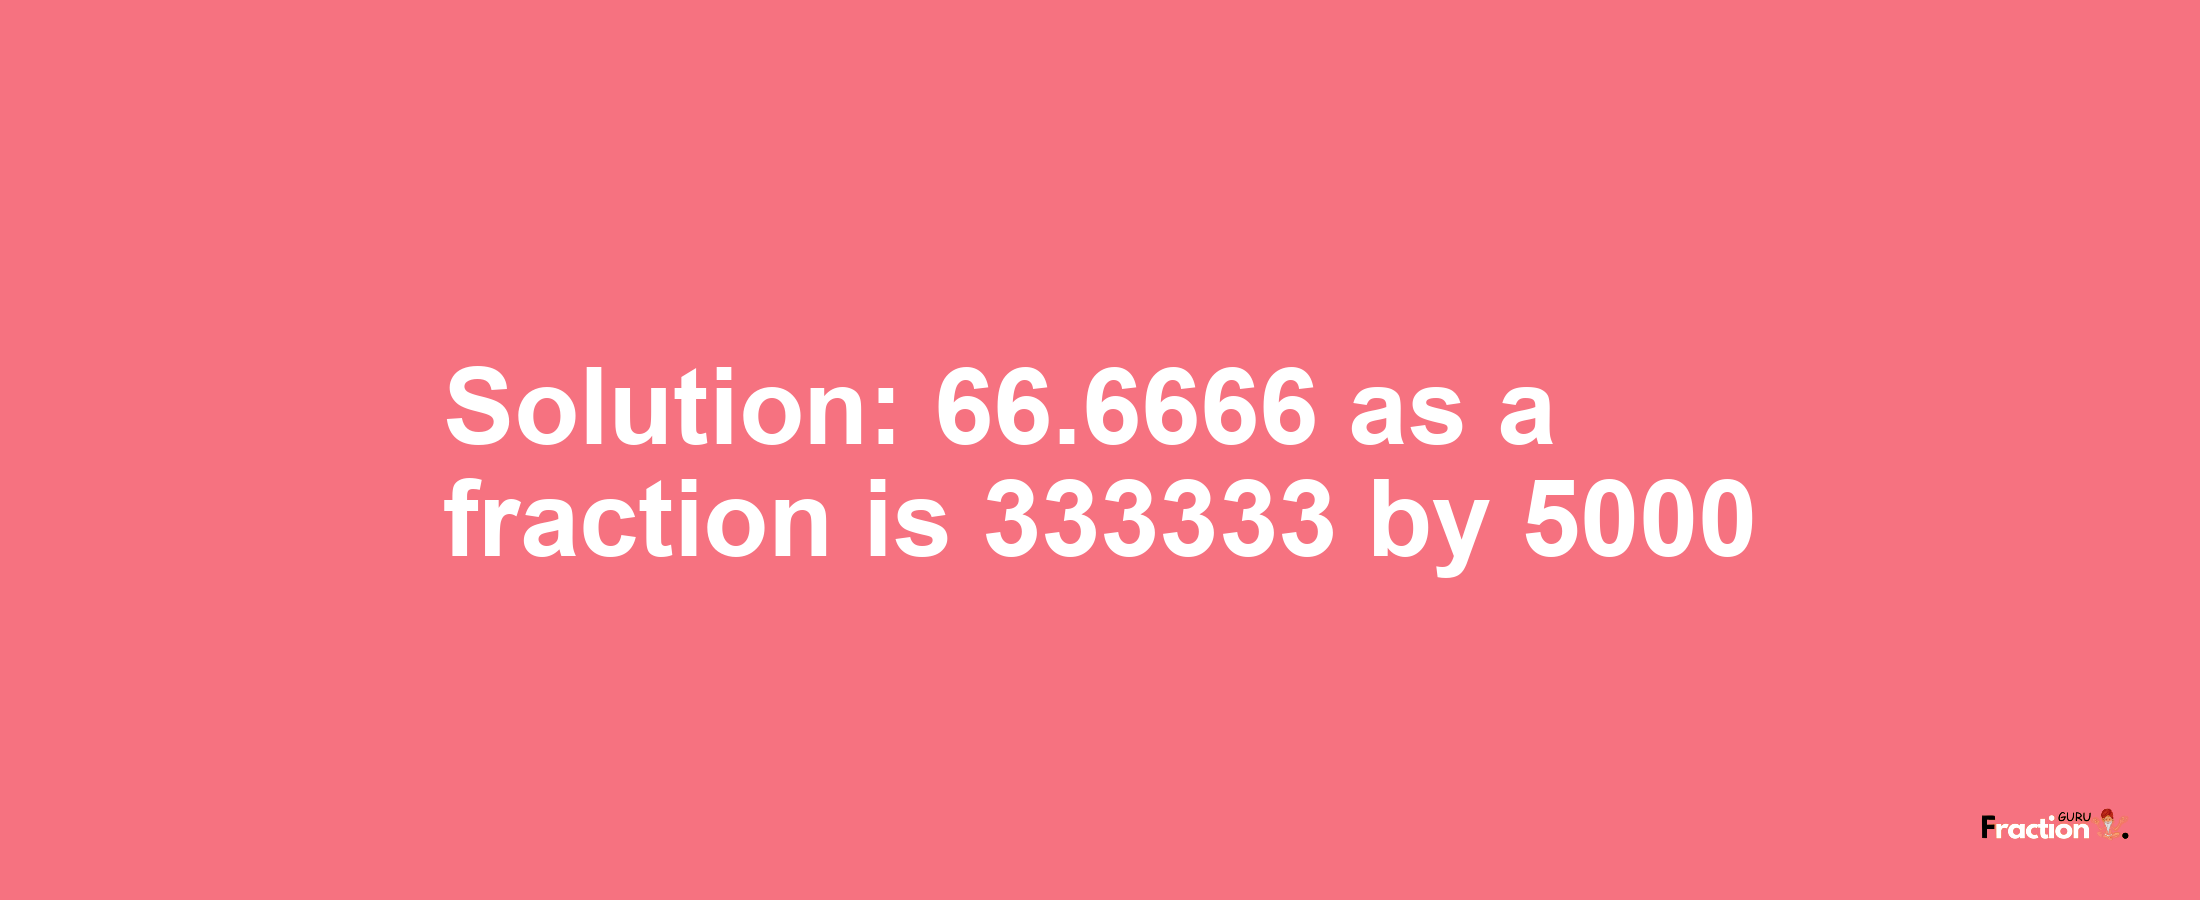 Solution:66.6666 as a fraction is 333333/5000